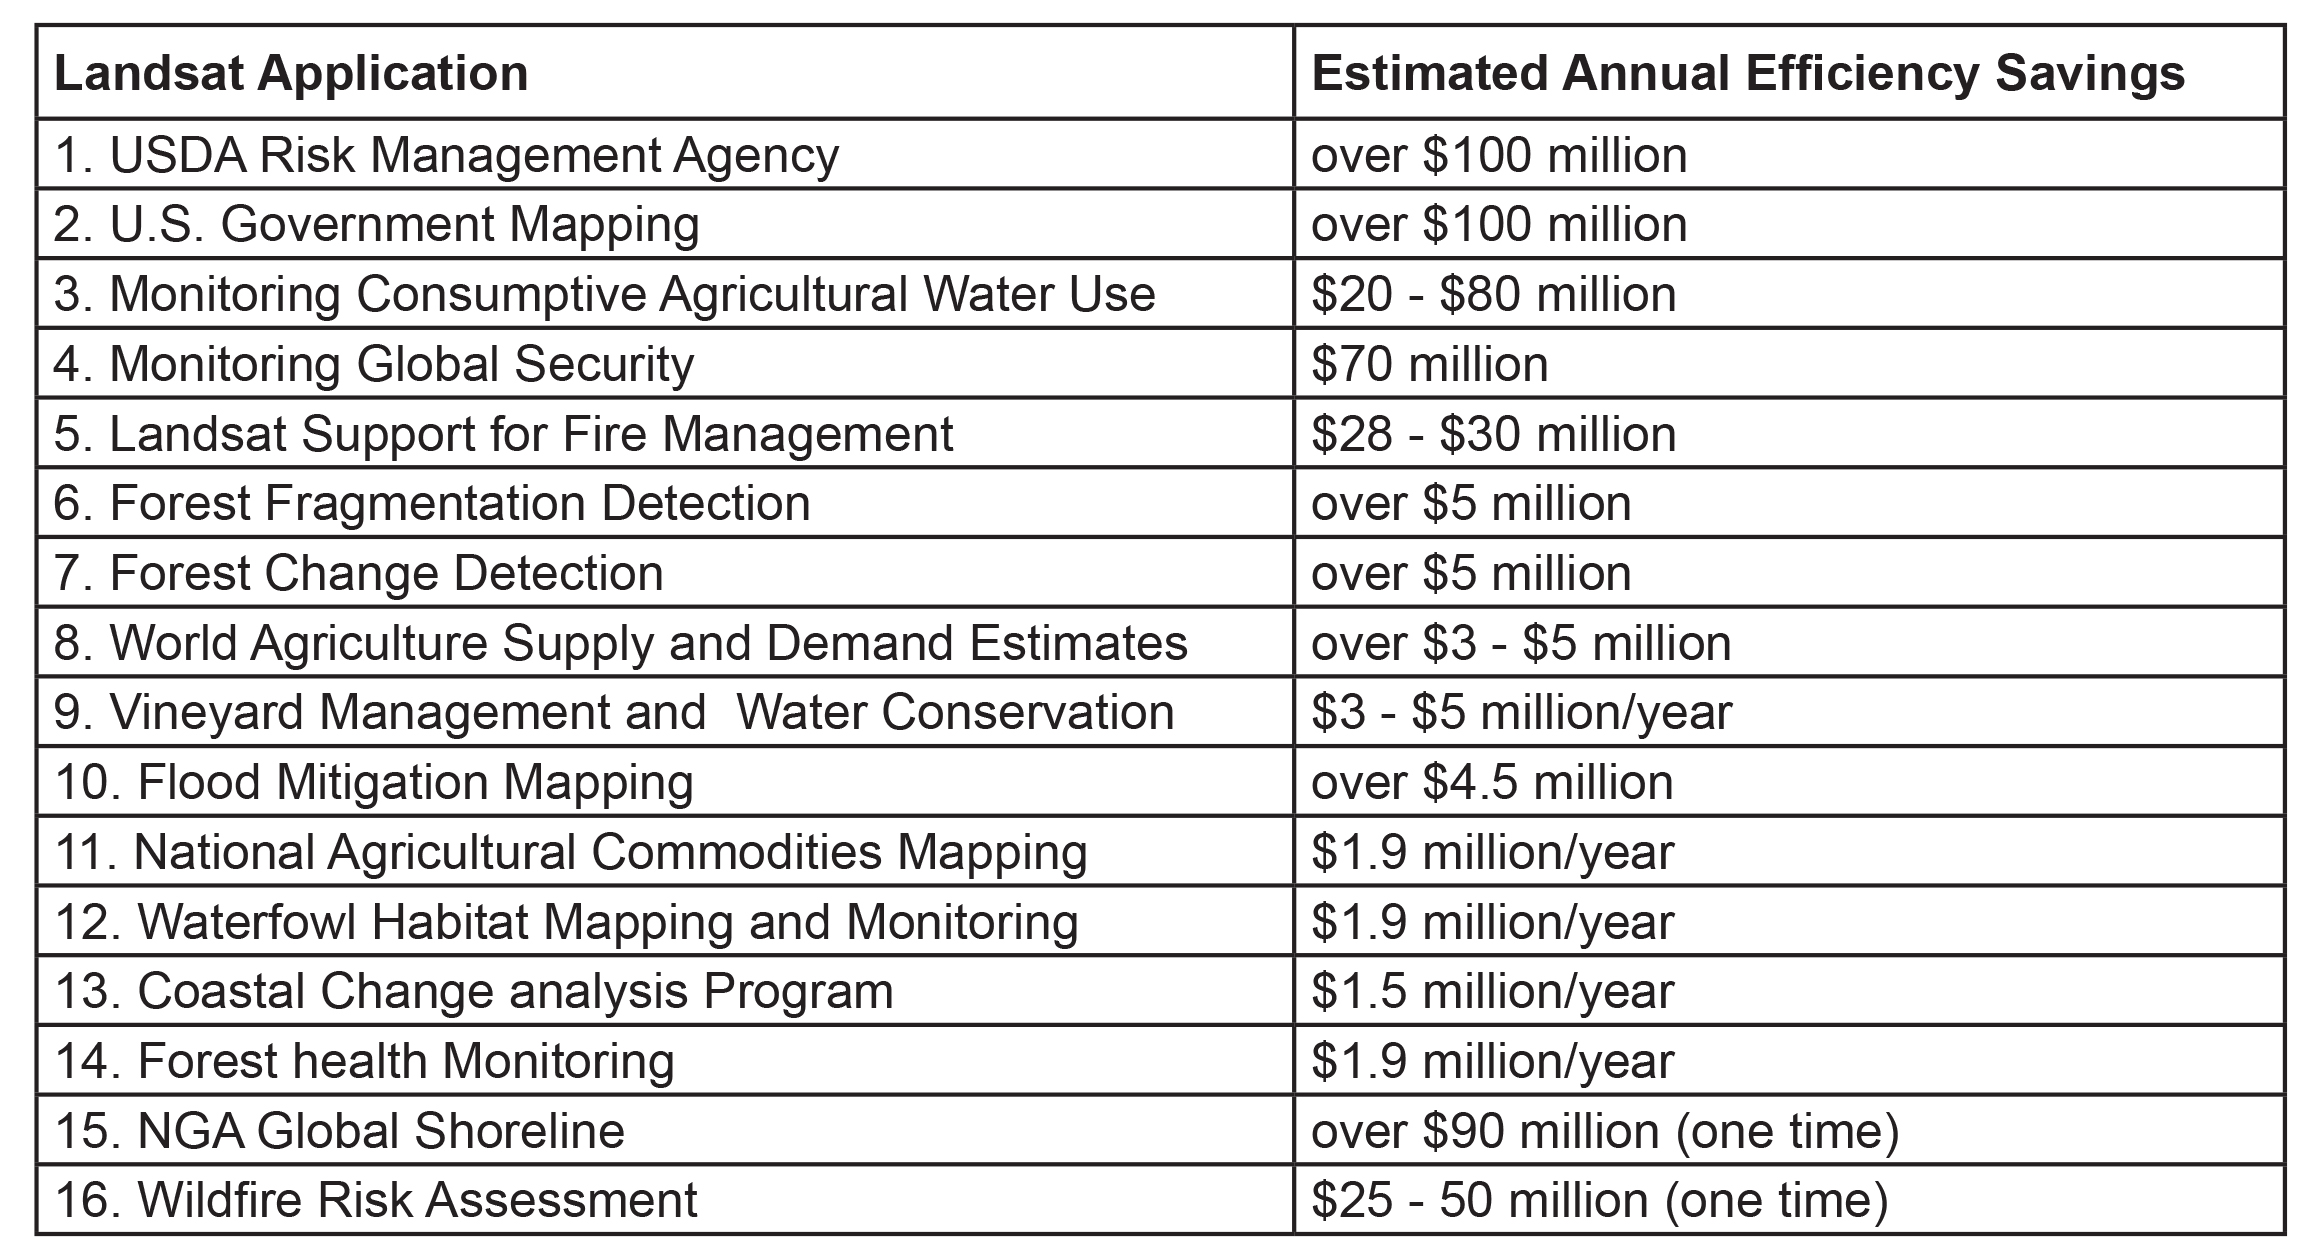 This table shows estimated productivity savings from diverse uses of Landsat imagery. These 16 Landsat applications alone produce savings of $350 million to over $436 million per year for Federal and State  Governments, NGOs, and the private sector. Further annual savings, societal benefits, and commercial applications are described in the Landsat Advisory Group report.